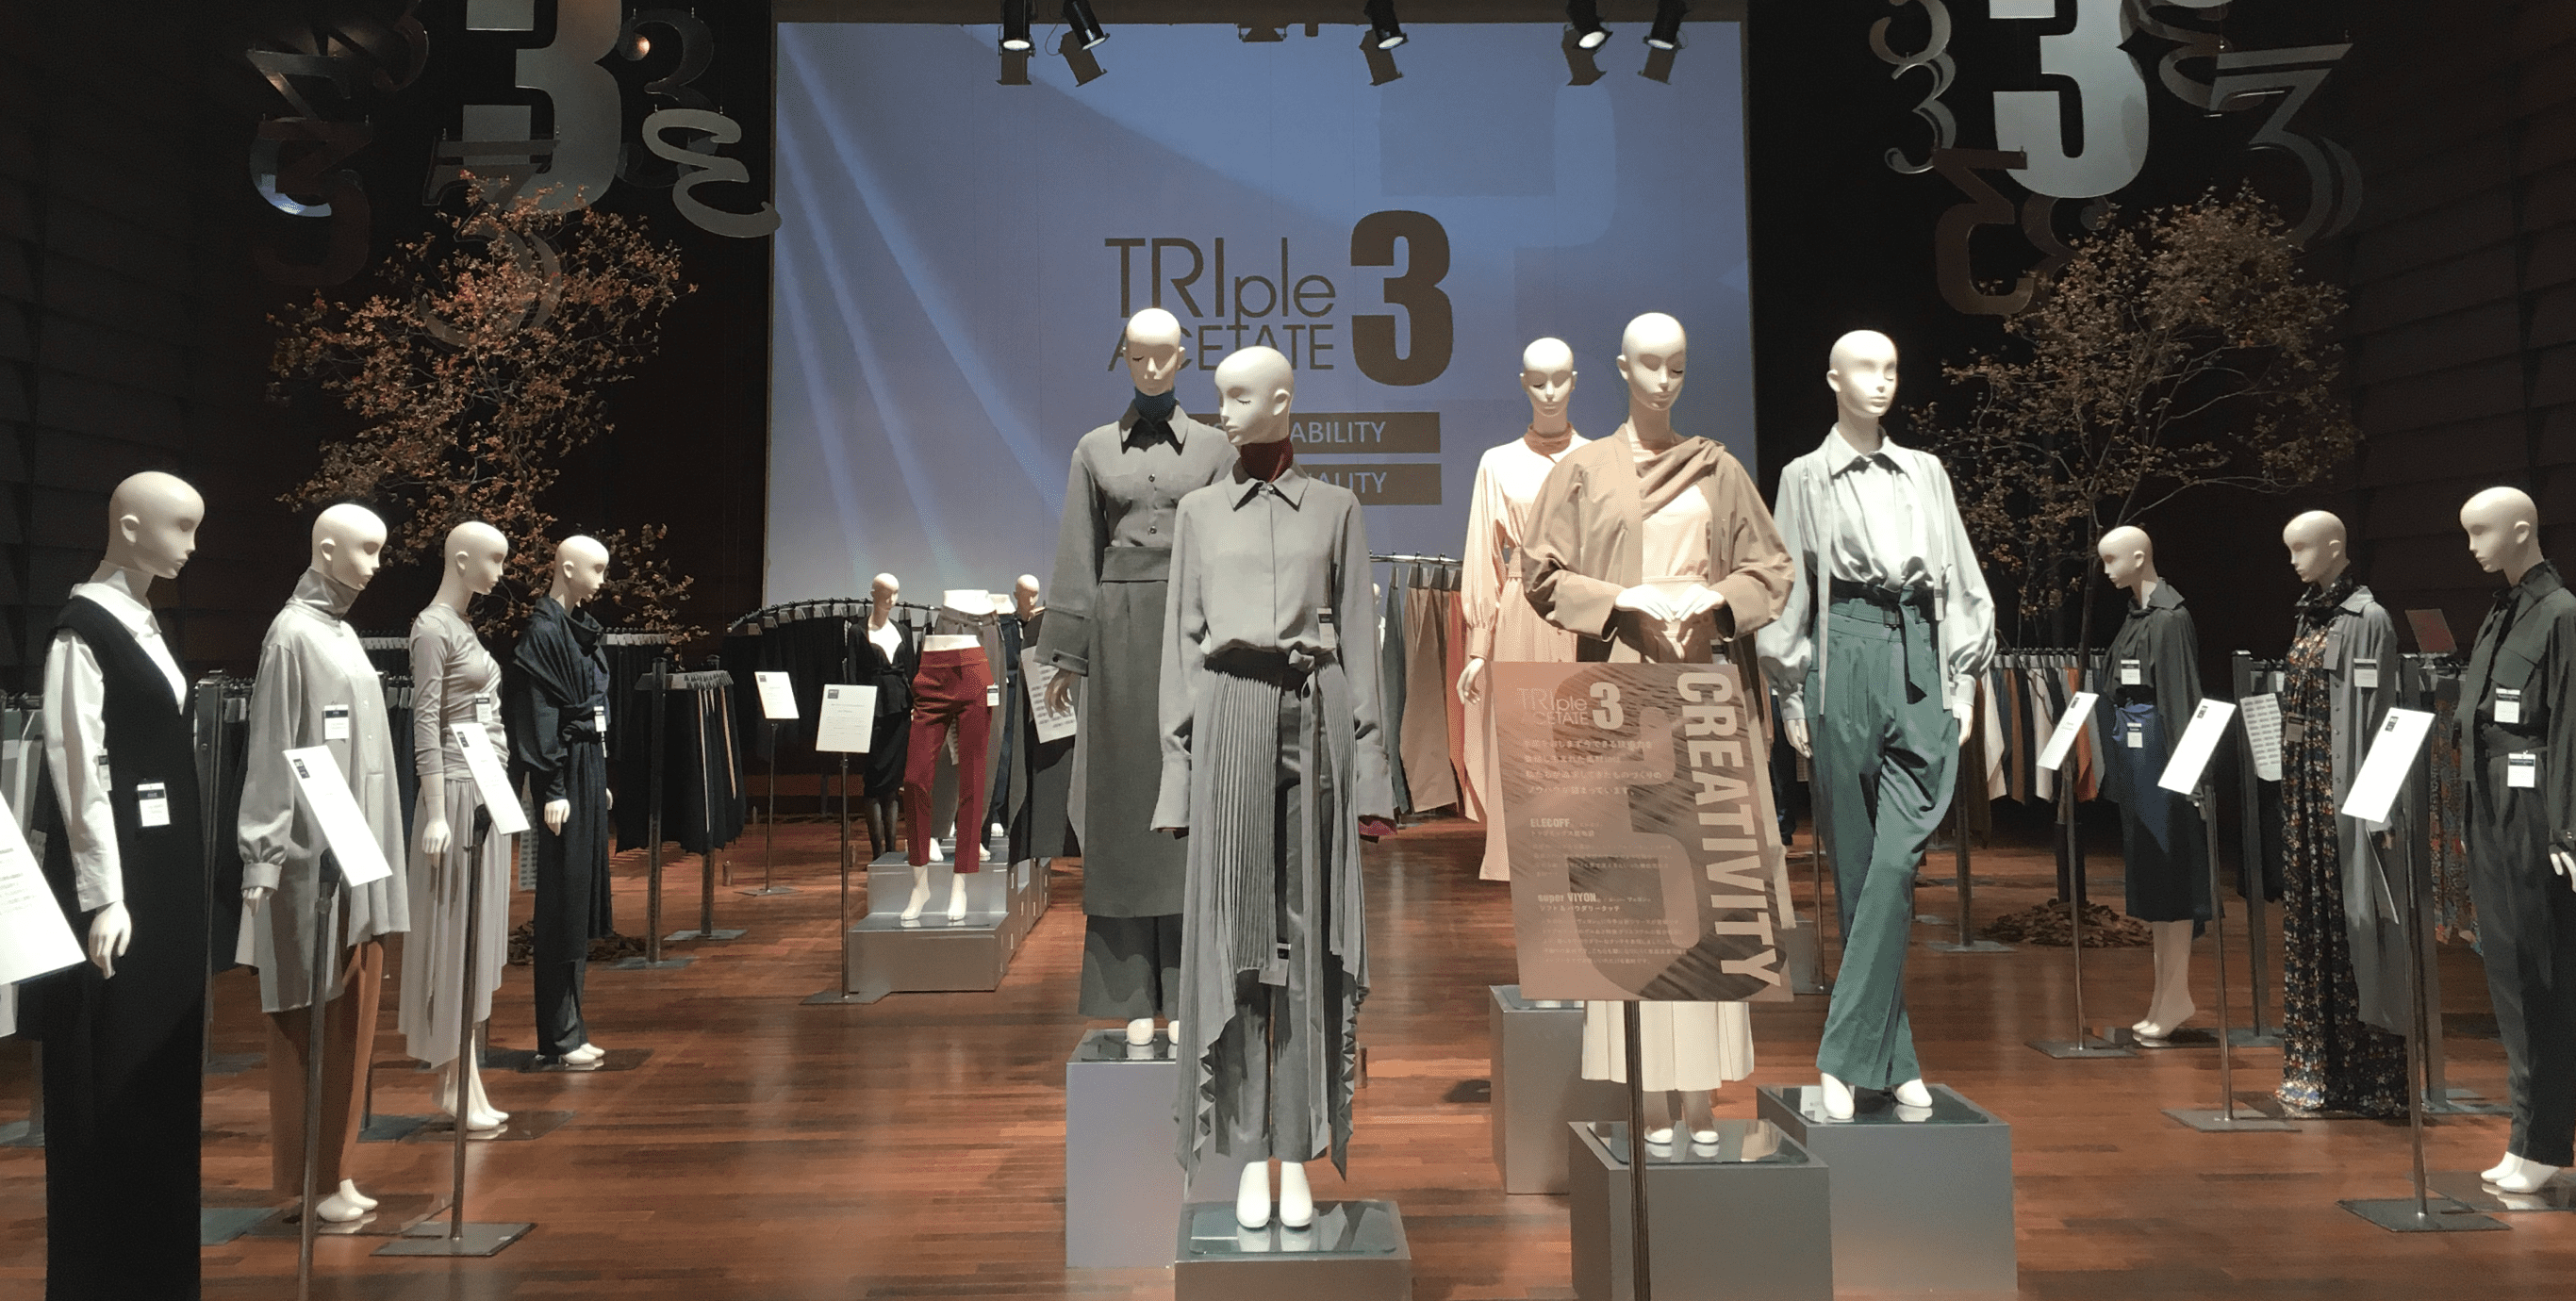 Autumn/winter 2020/21 Tokyo exhibition to be held at Jiji Press Hall